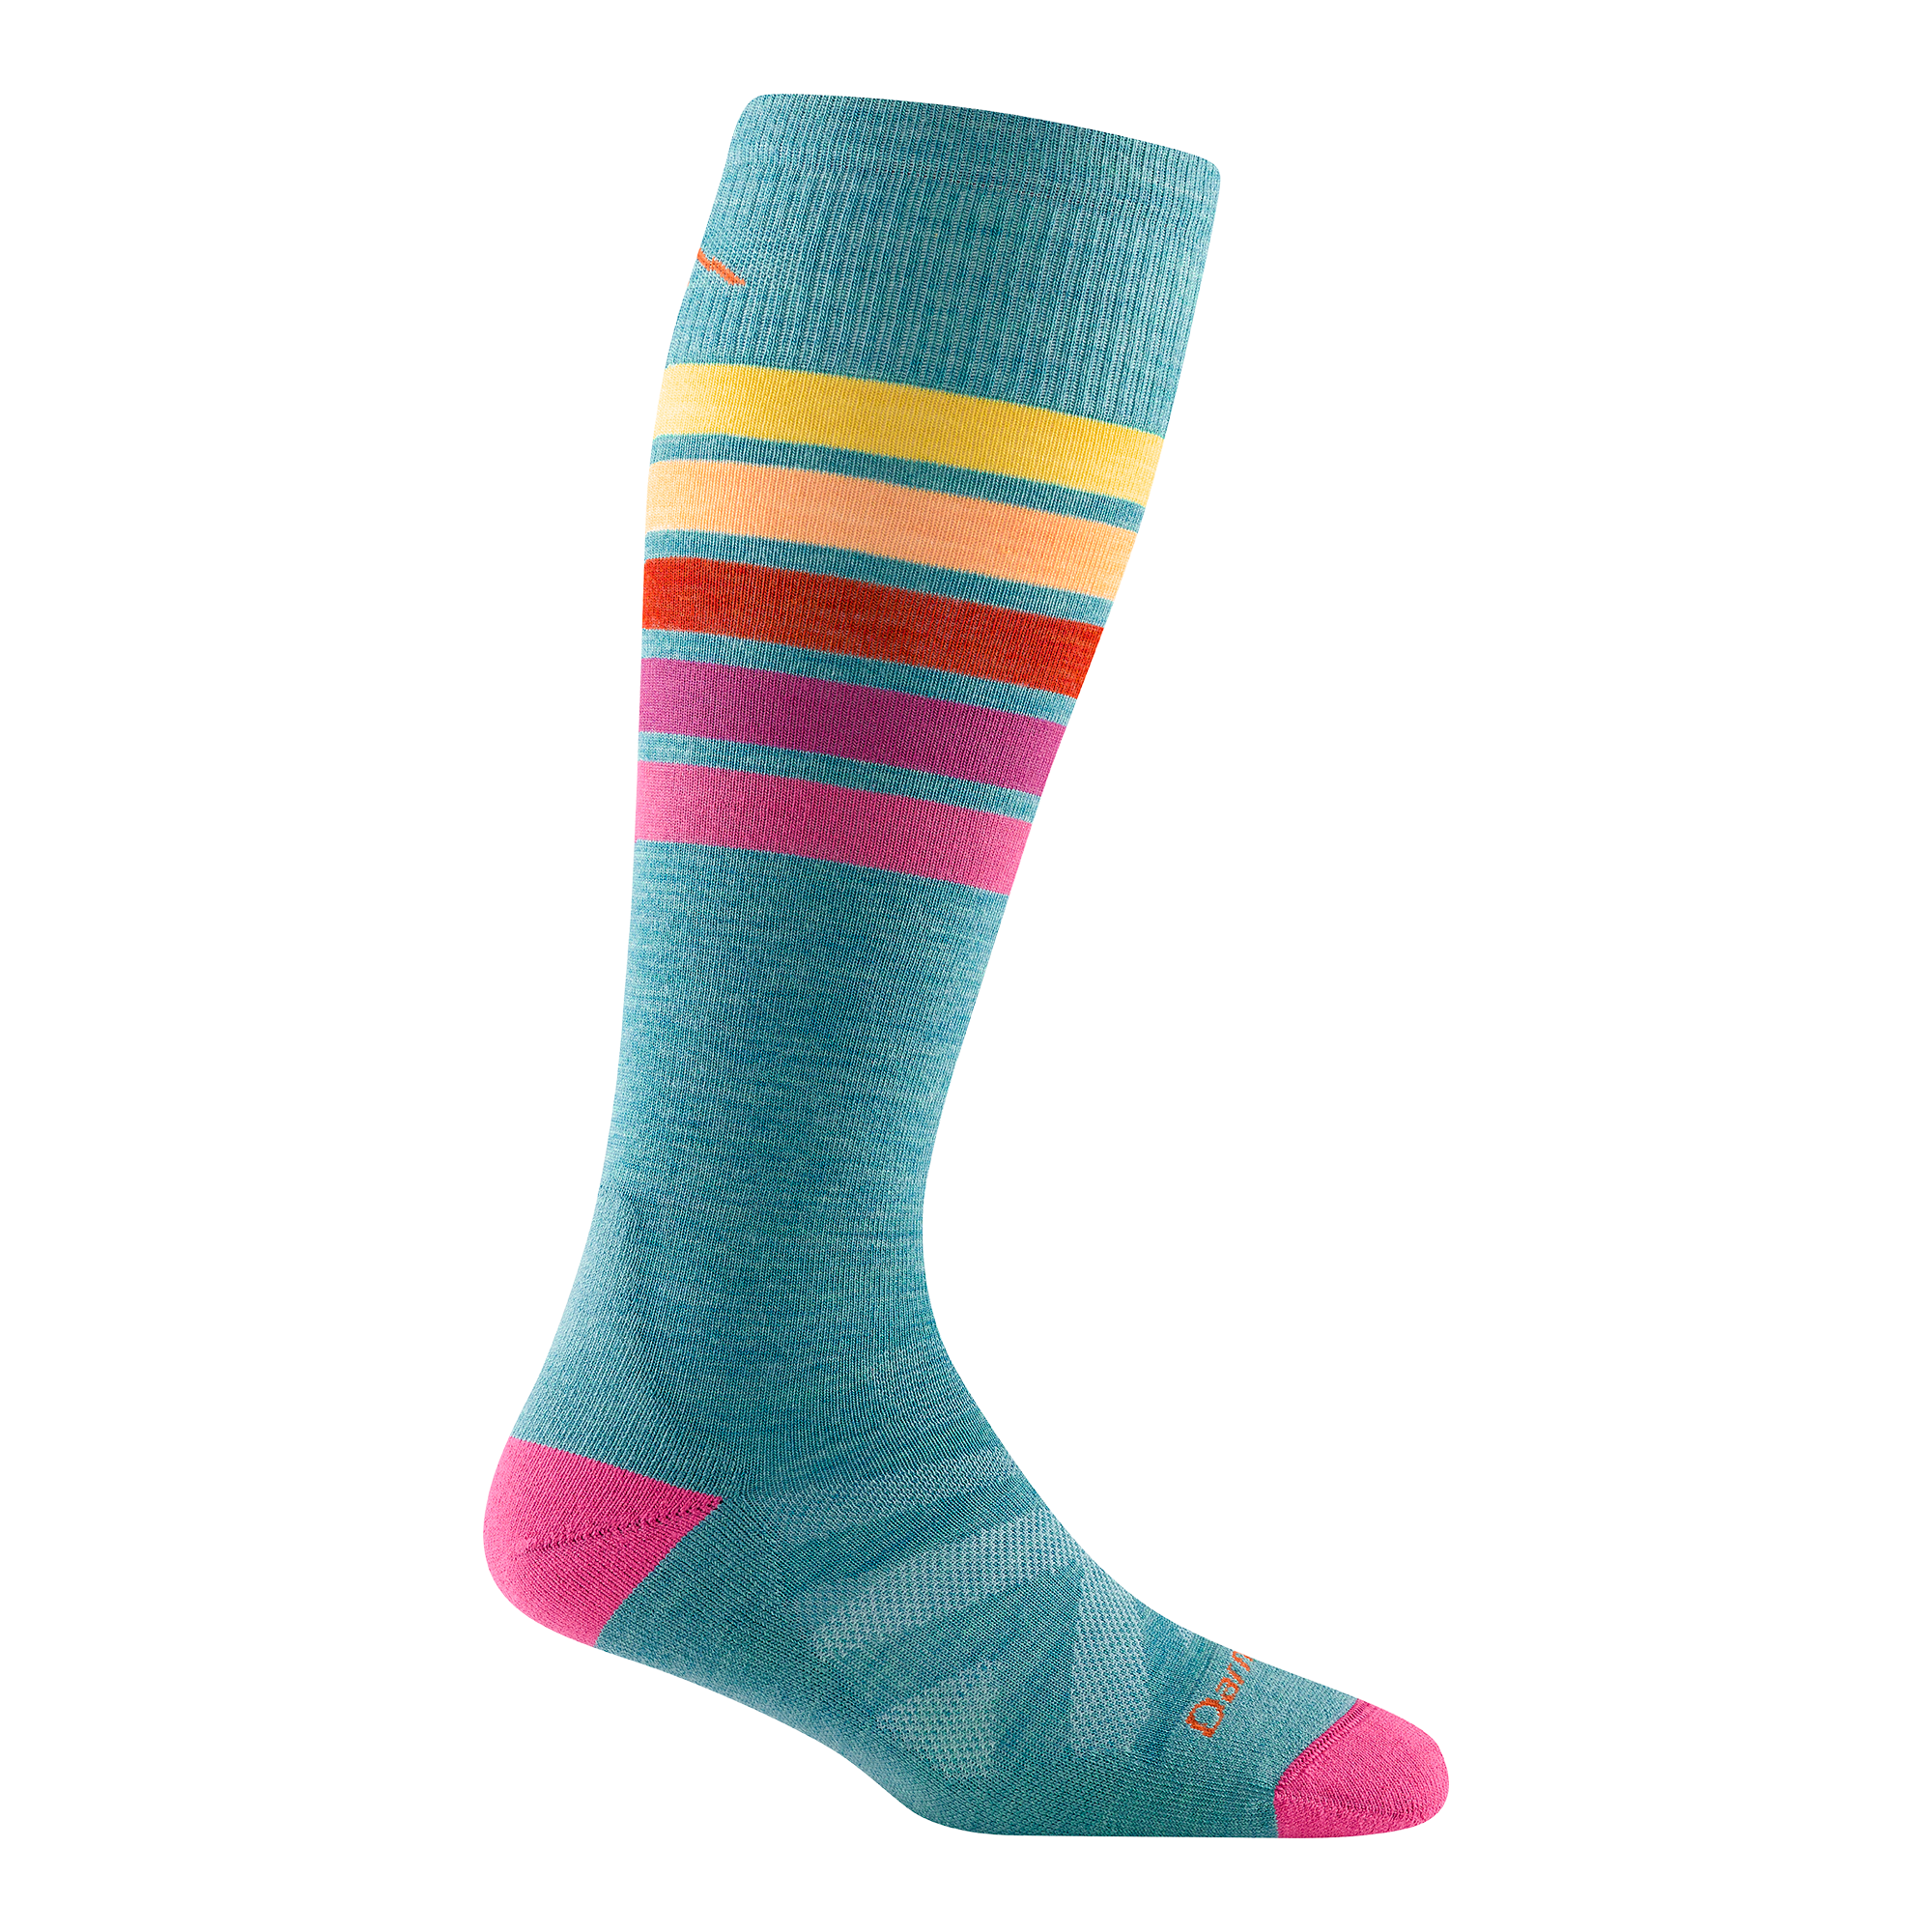 8028 women's snowburst over-the-calf ski sock in aqua with pink toe/heel accents and pink, red, and yellow calf striping